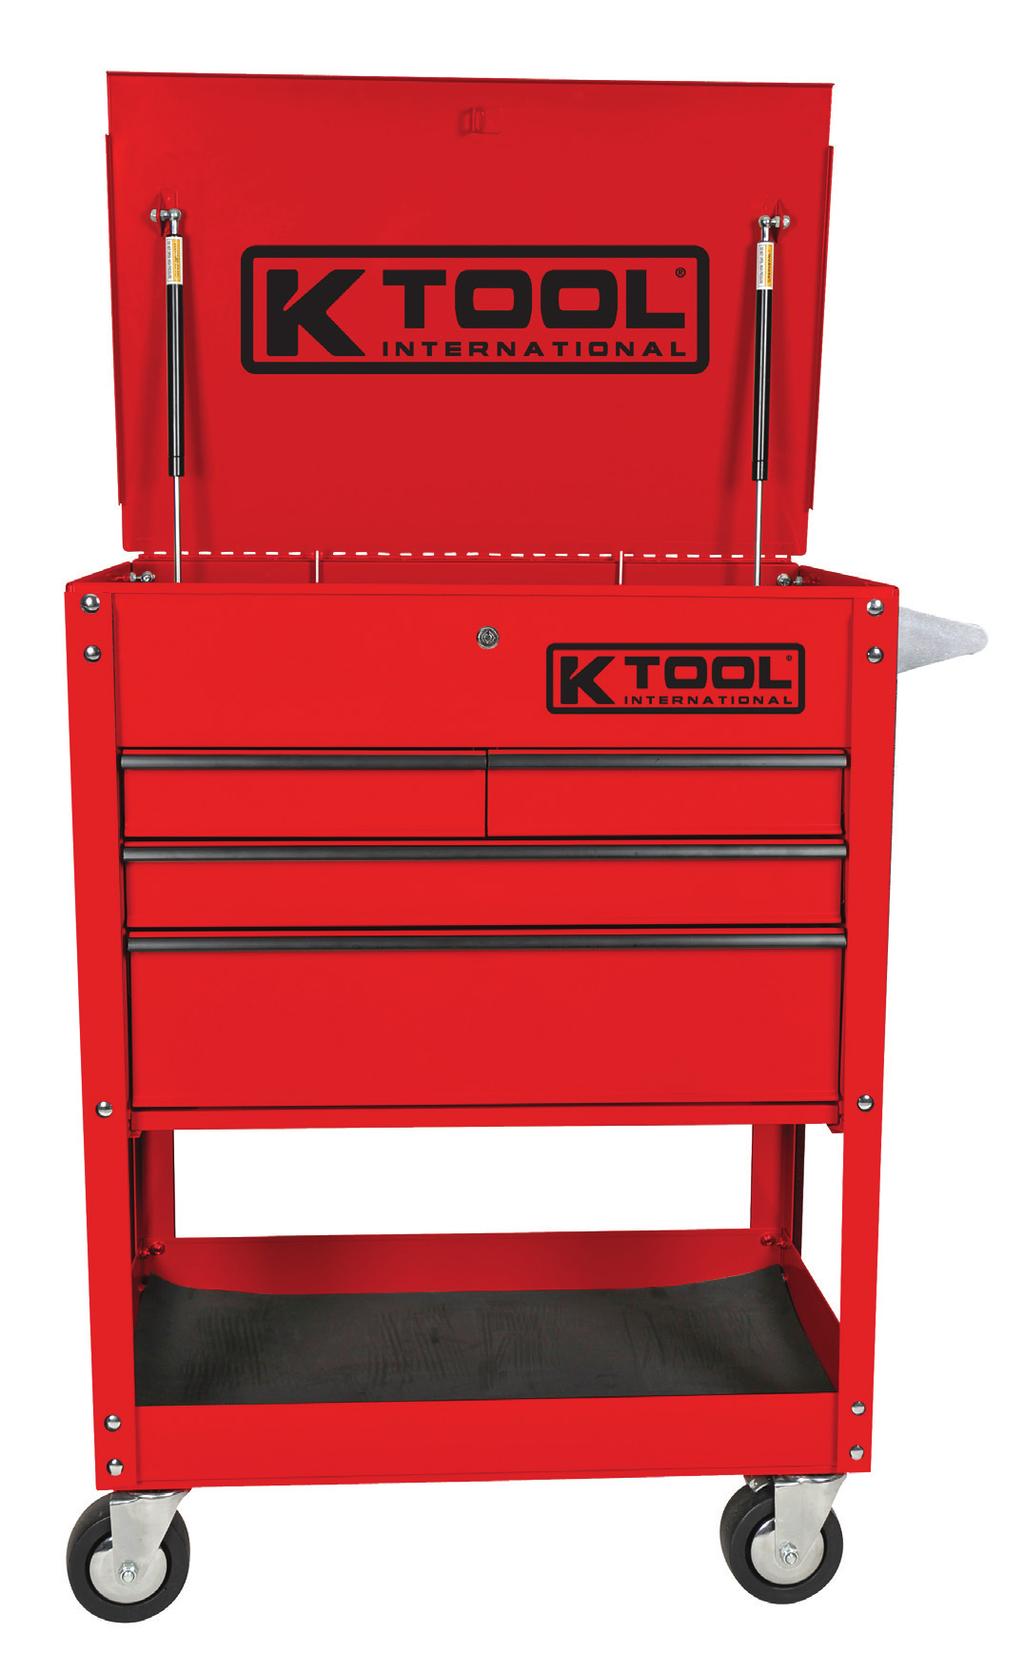 Top drawer depth (2) 3, Middle drawer depth 3, Bottom drawer depth 6 1 Year Warranty on material and workmanship KTI75105 One-Drawer Steel Service Tool Cart with 2 Lined Shelves Durable construction